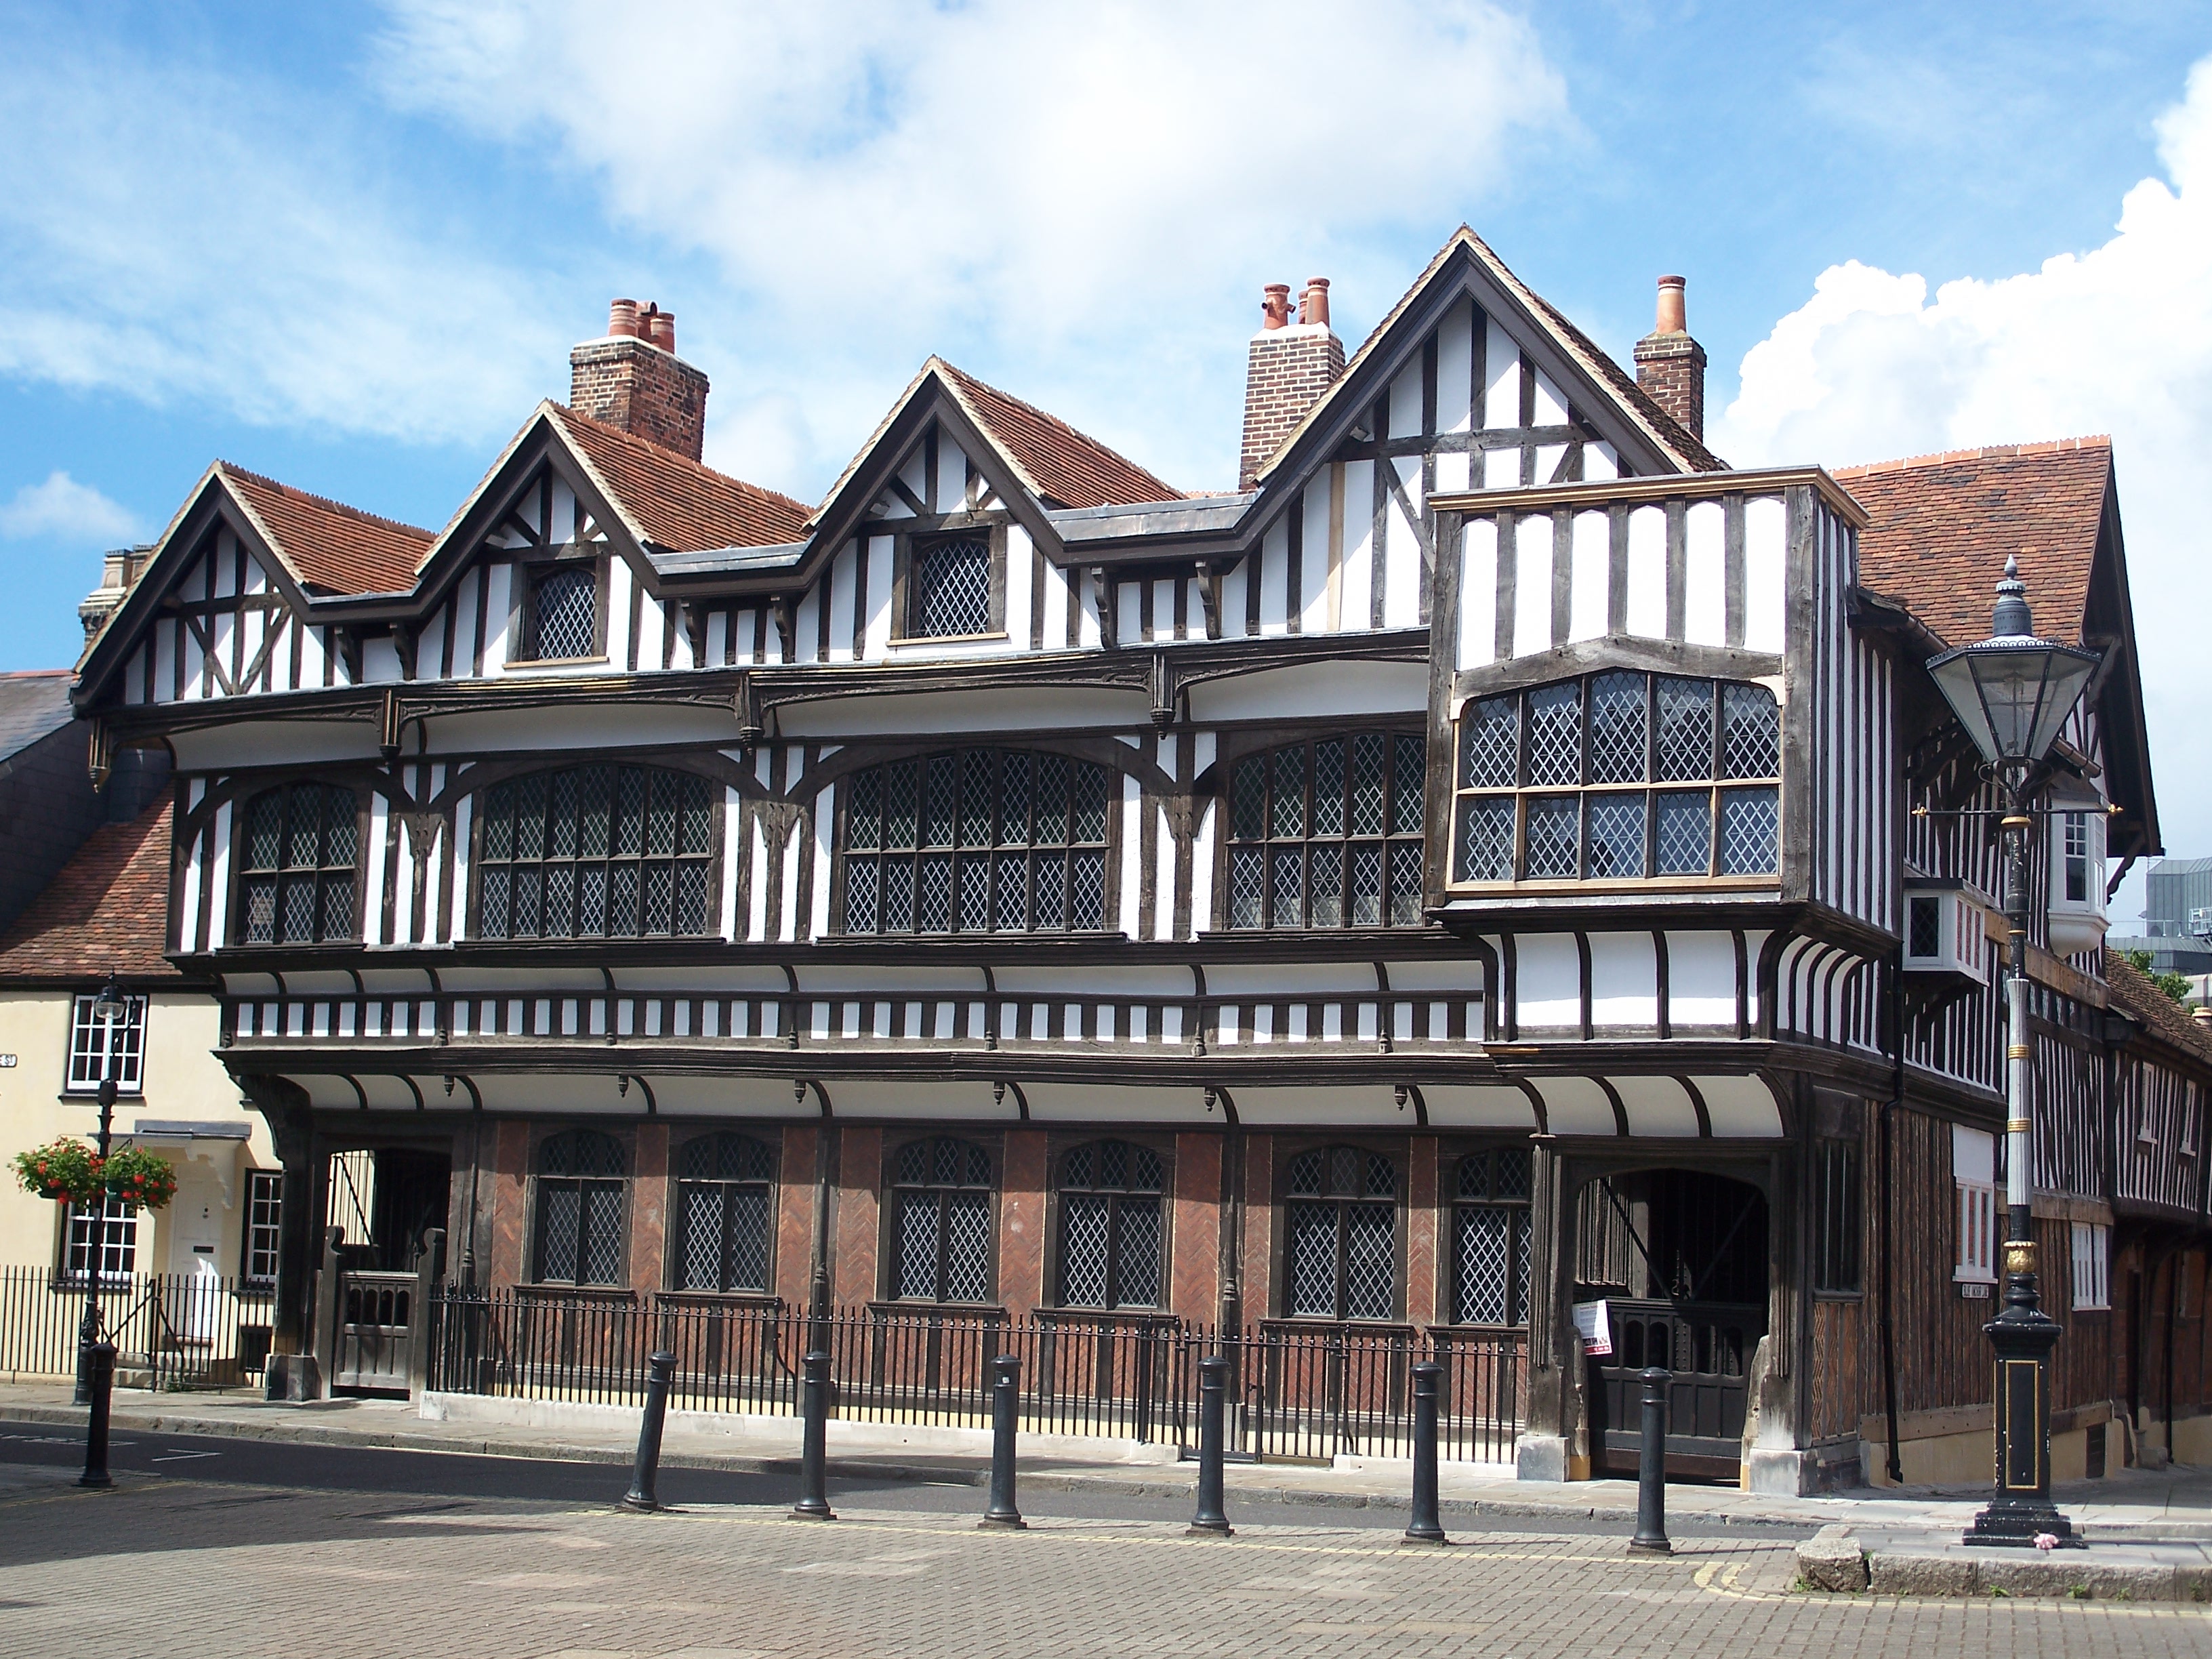 File:Medieval house in southampton, england.JPG - Wikimedia Commons